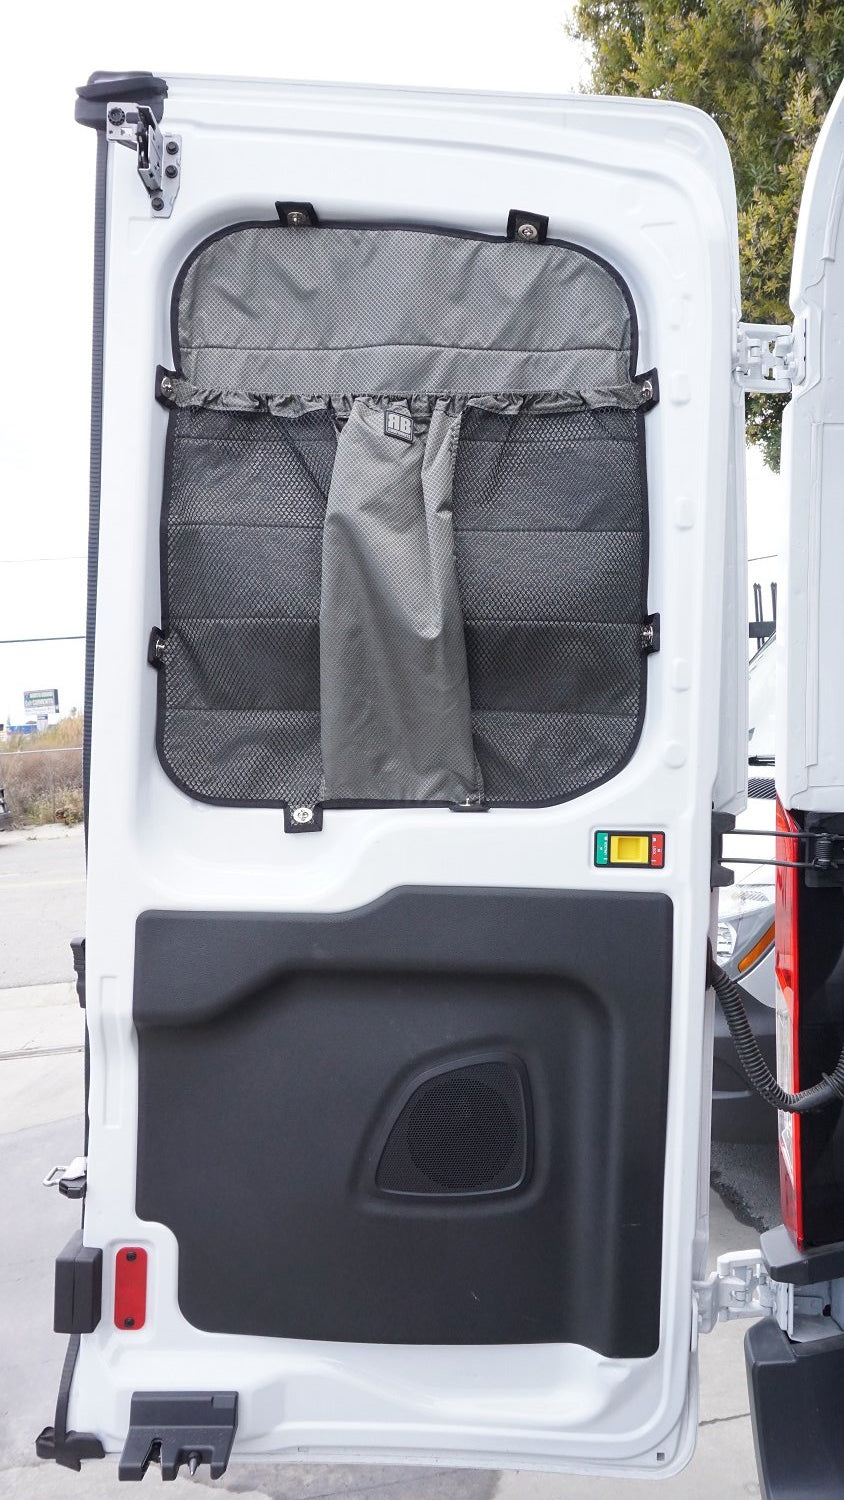 2014 + Transit  Van Rear Window Covers with Stuff Bags